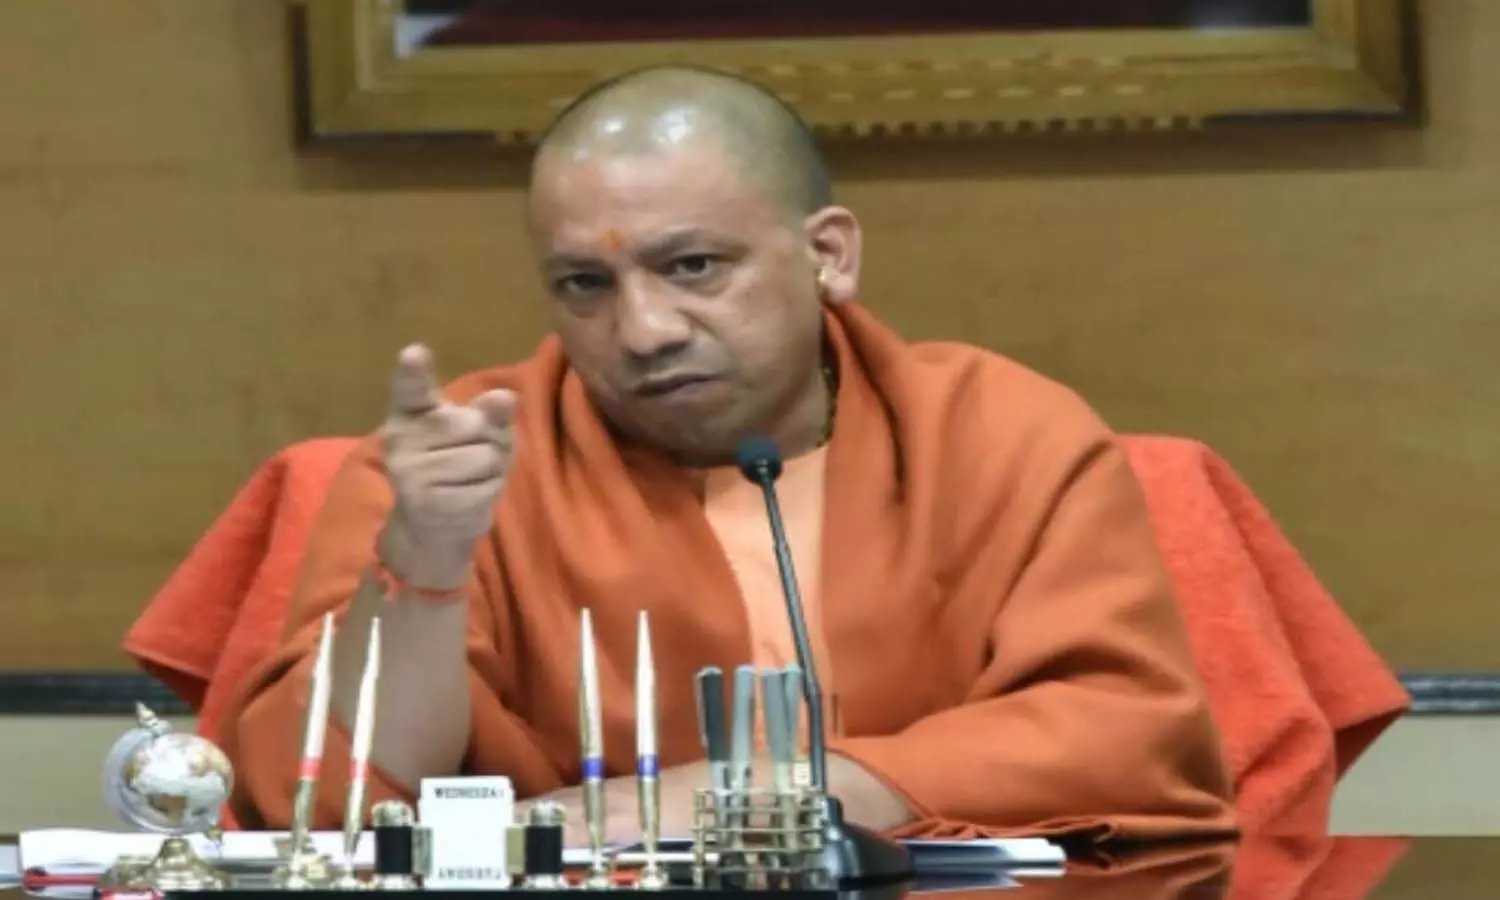 CM Yogi convened a meeting of officers at 7 pm on Wednesday, will review law and order